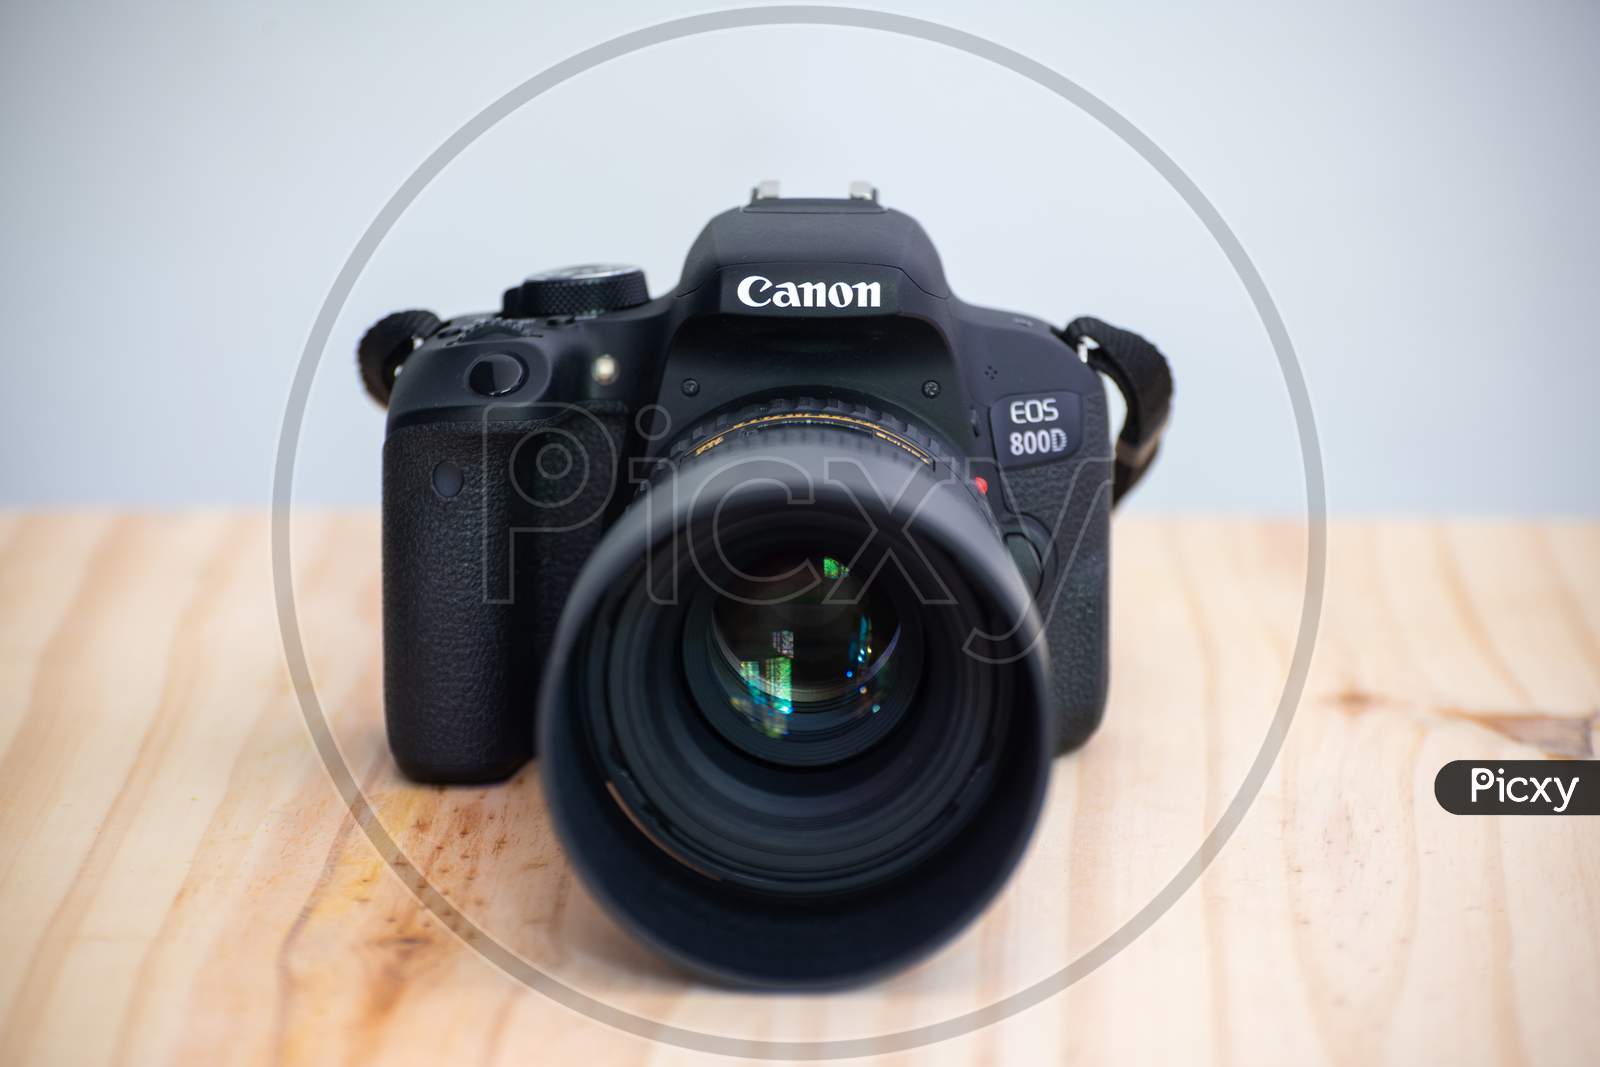 Galle, Sri Lanka - 02 18 2021: Canon Eos 800D Also Known As Rebel T7I Dslr Camera And The Mounted Tokina 100Mm 2.8 Macro Lens With Lens Cap Front View, On A Wooden Table, Neutral Color Background.